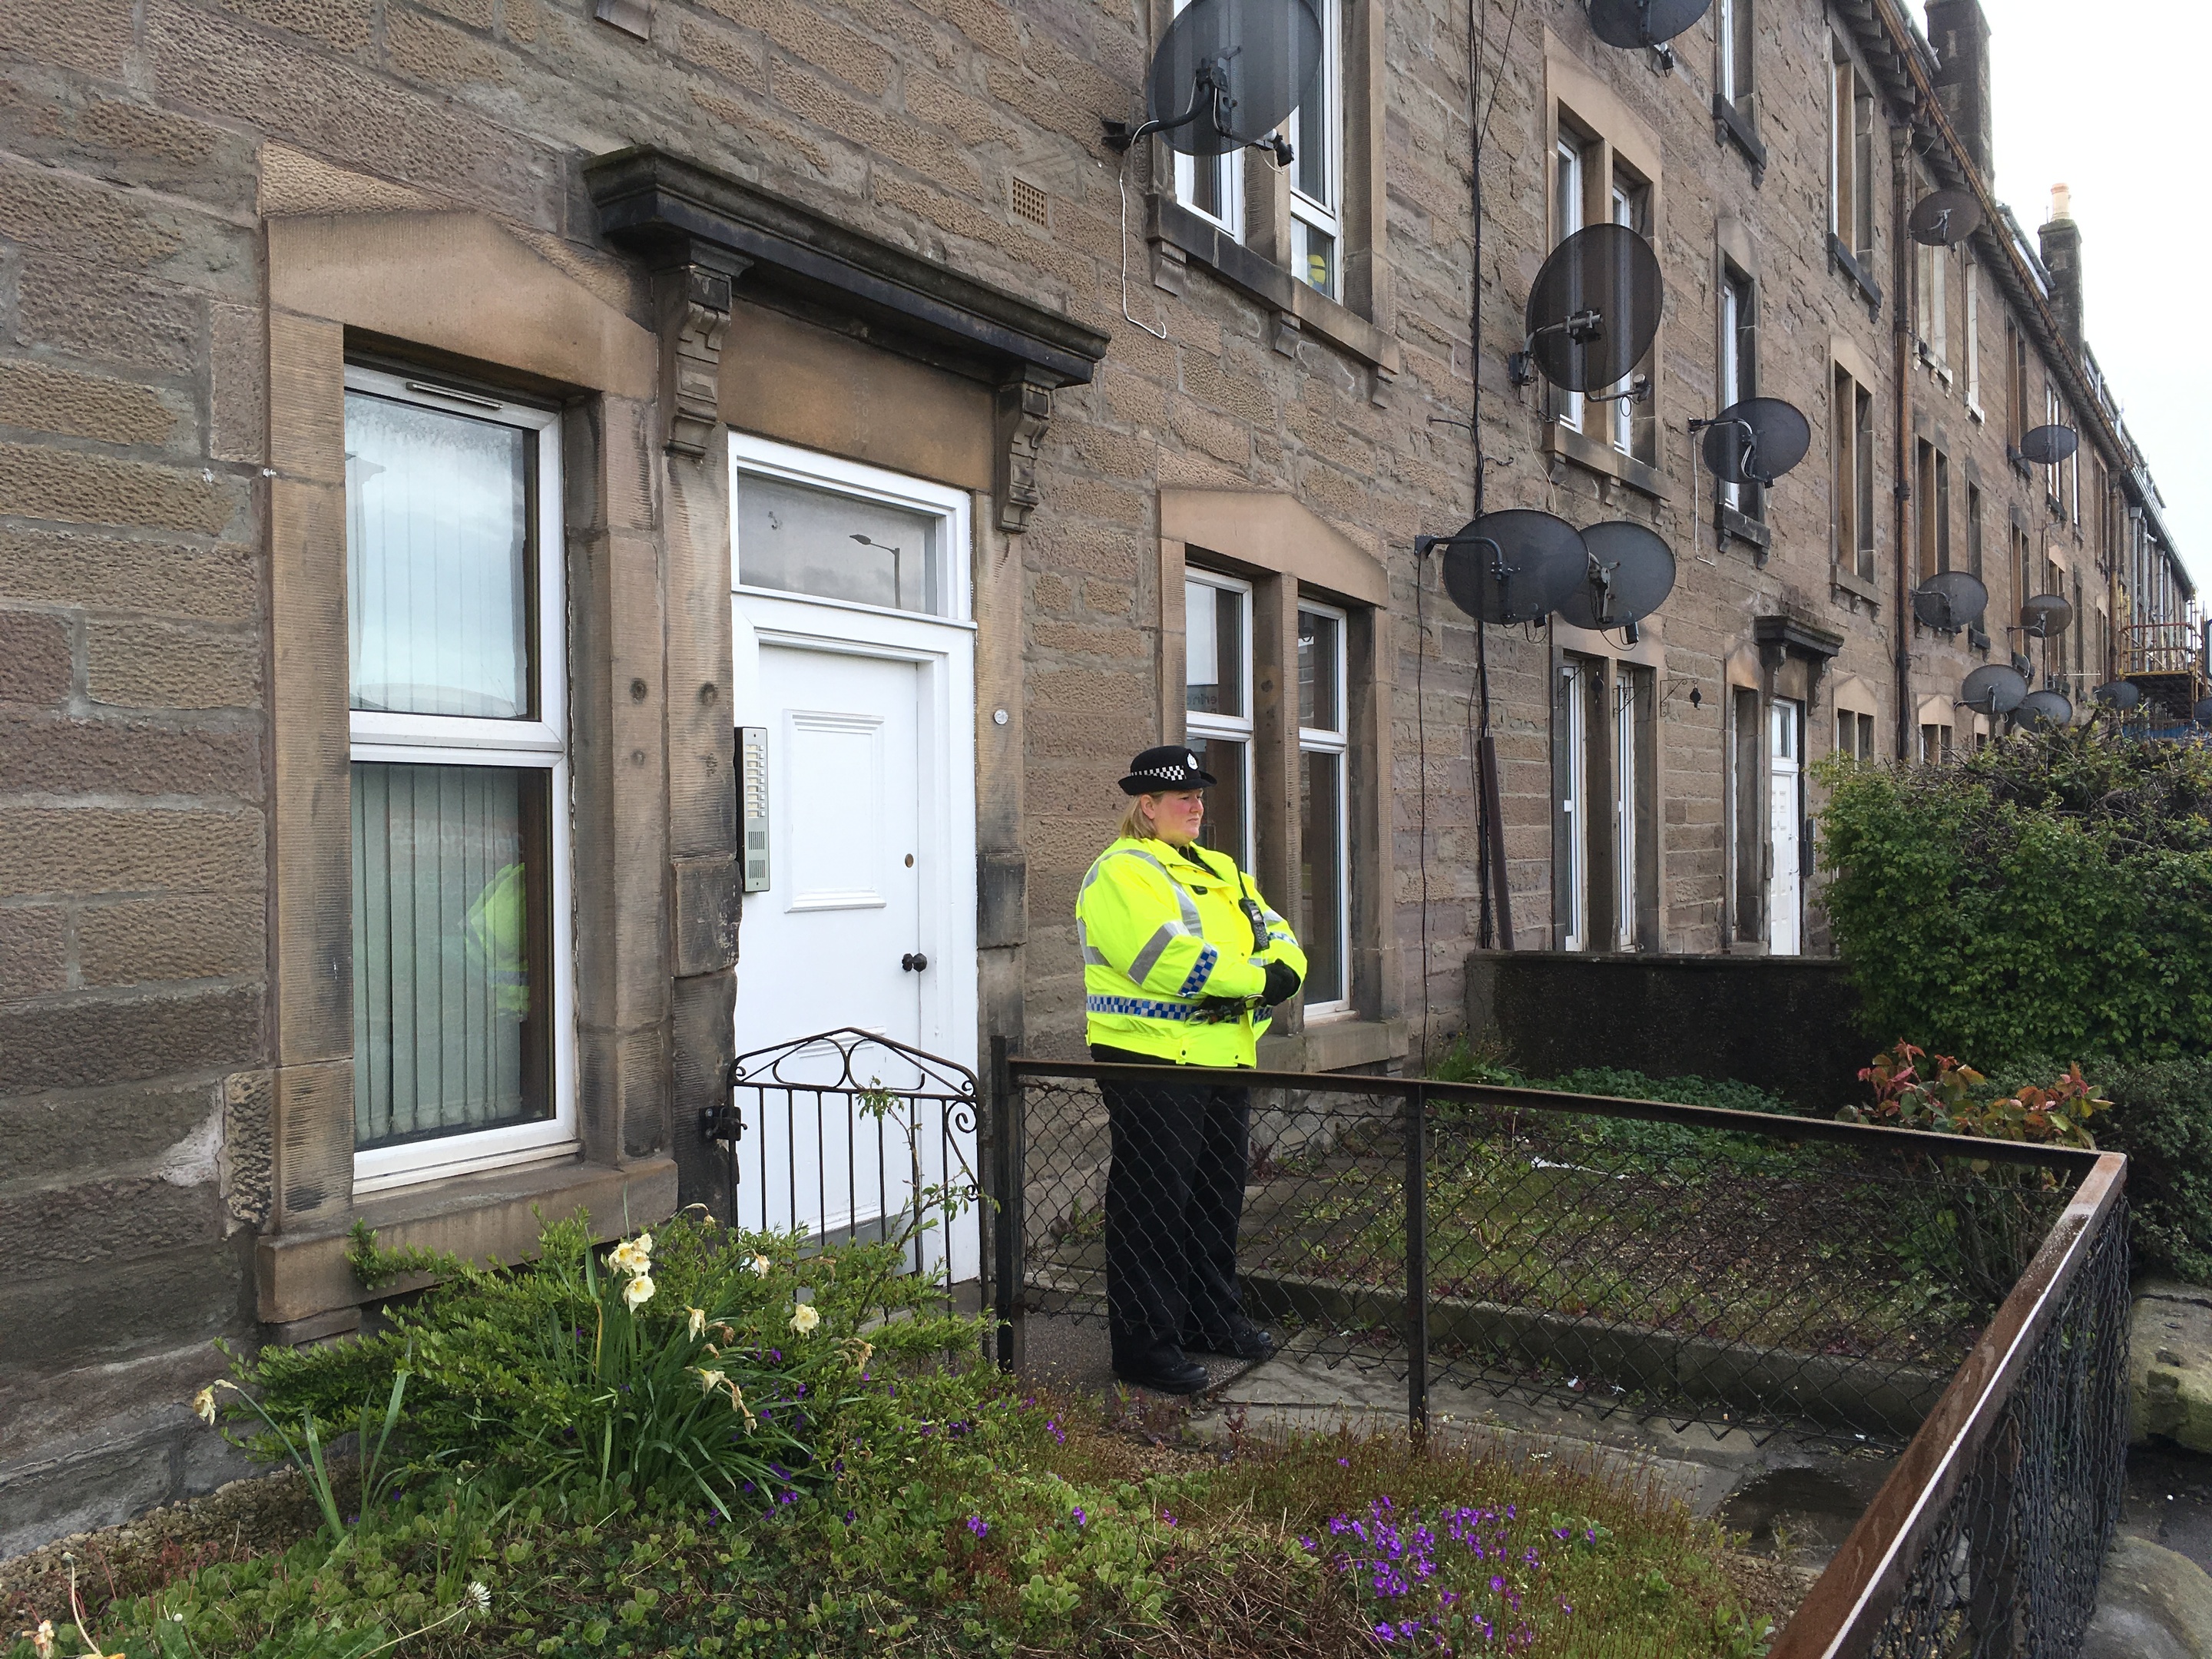 Police stand guard outside flat where woman was found dead.